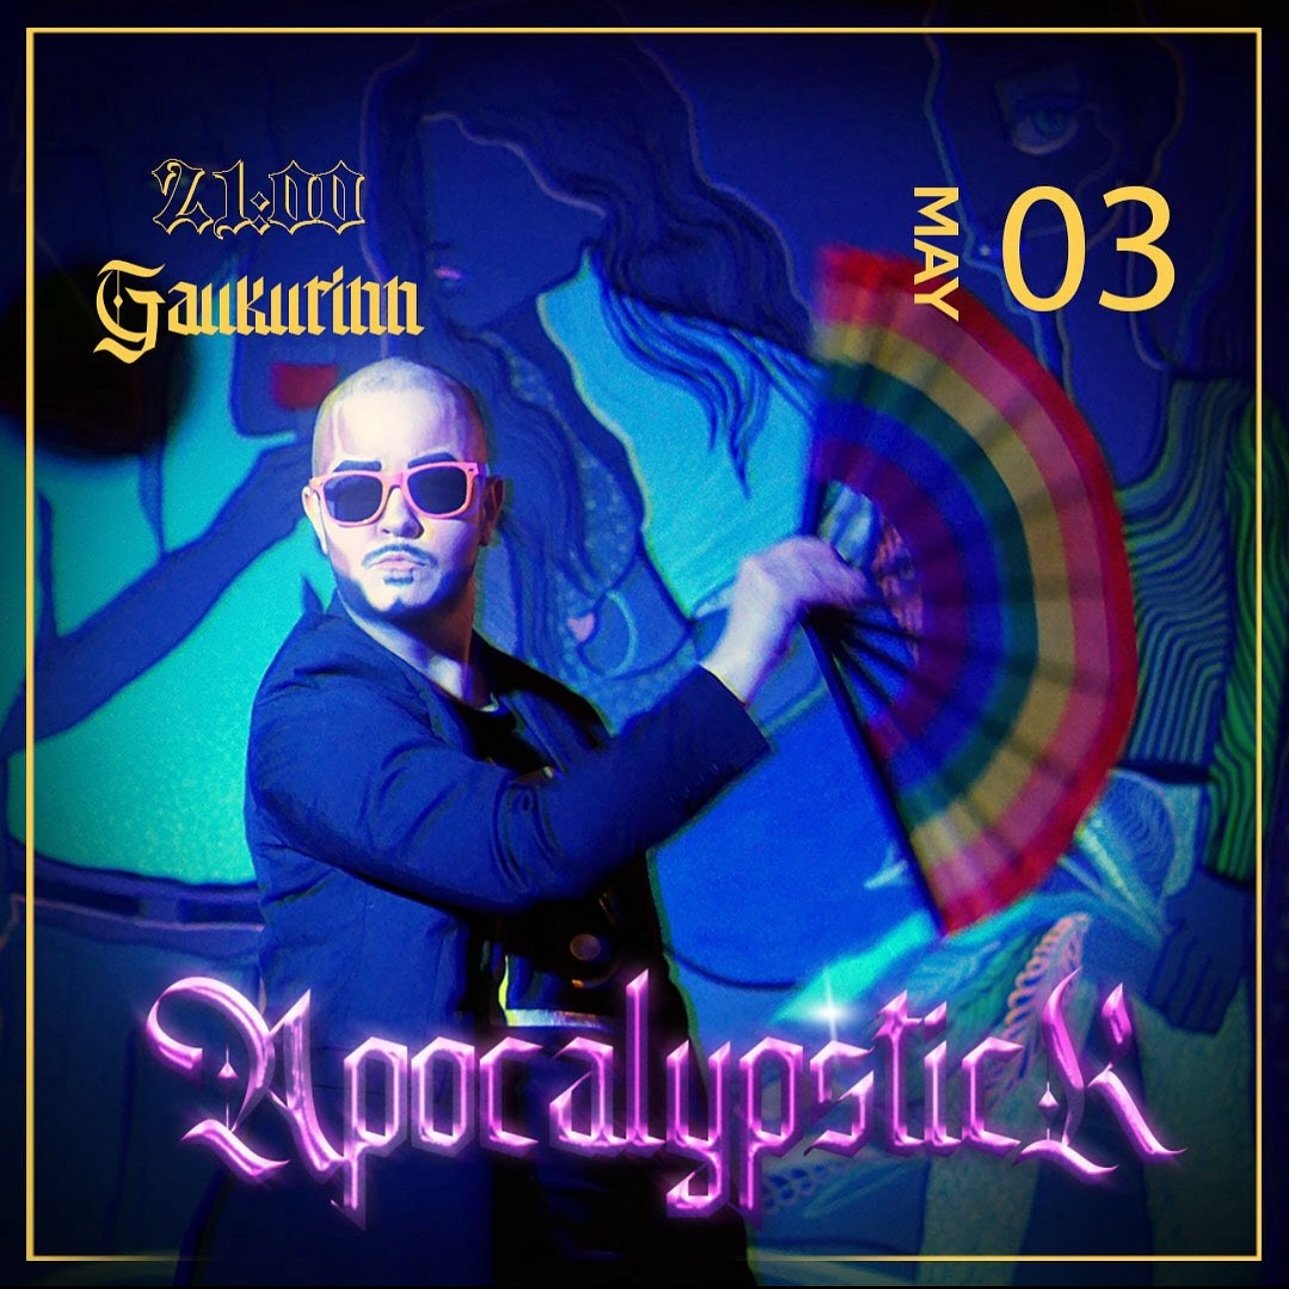 THE WILDEST OF WILD SHOWS IS HAPPENING TONIGHT🔥🔥
APOCALYPSTICK IS HAPPENING TONIGHT AT GAUKURINN!
You want to see some kings? Some Queens? And everything inbetween???? 
Come join us for the night to see a CRAAAAZY EXTRAVAGANZA!🥹🫶🔥💅
Happy hour f